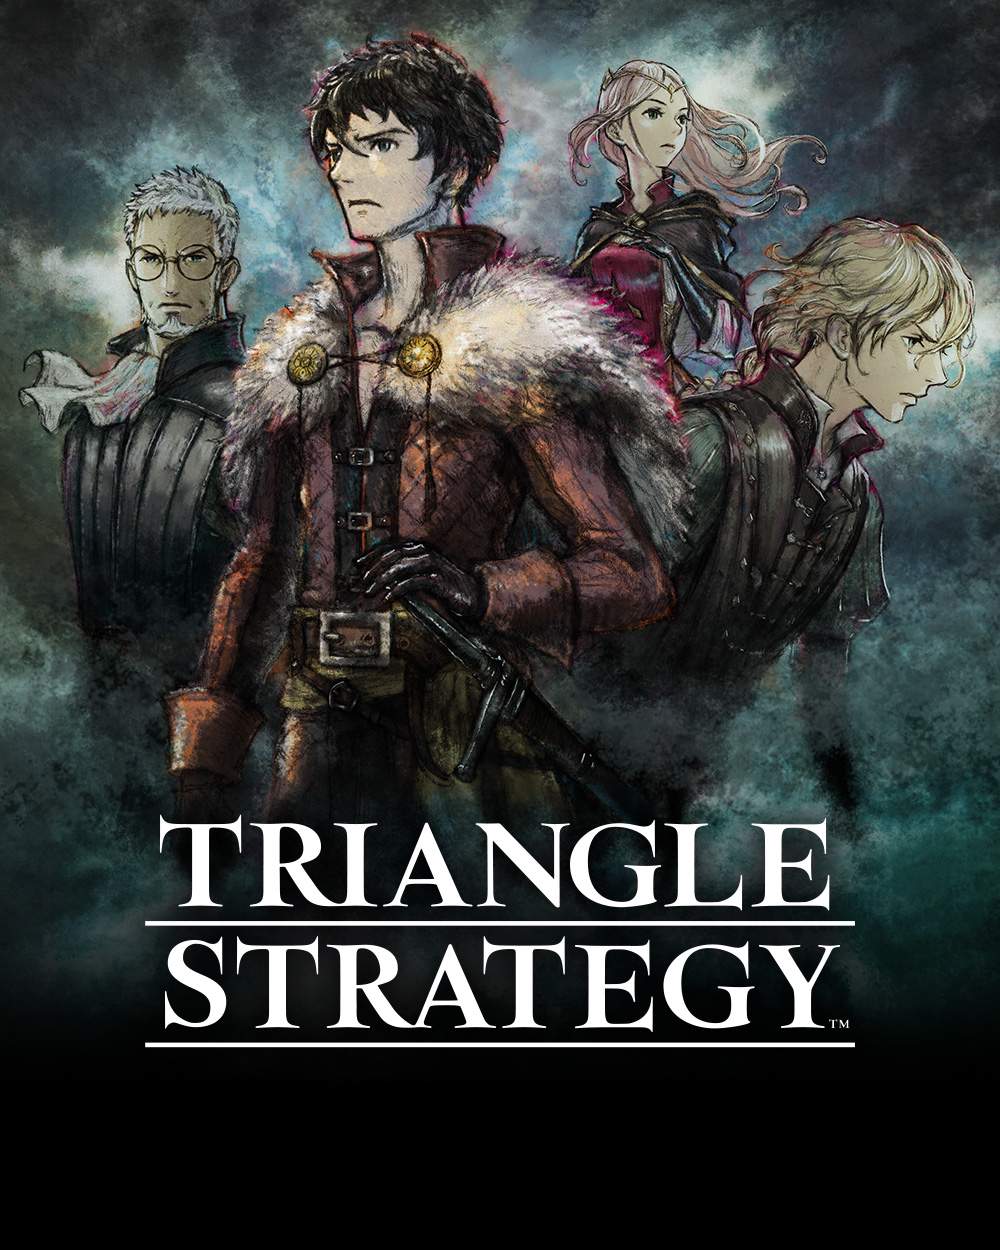 TRIANGLE STRATEGY key art showing the four protagonists in an illustrated style with game logo